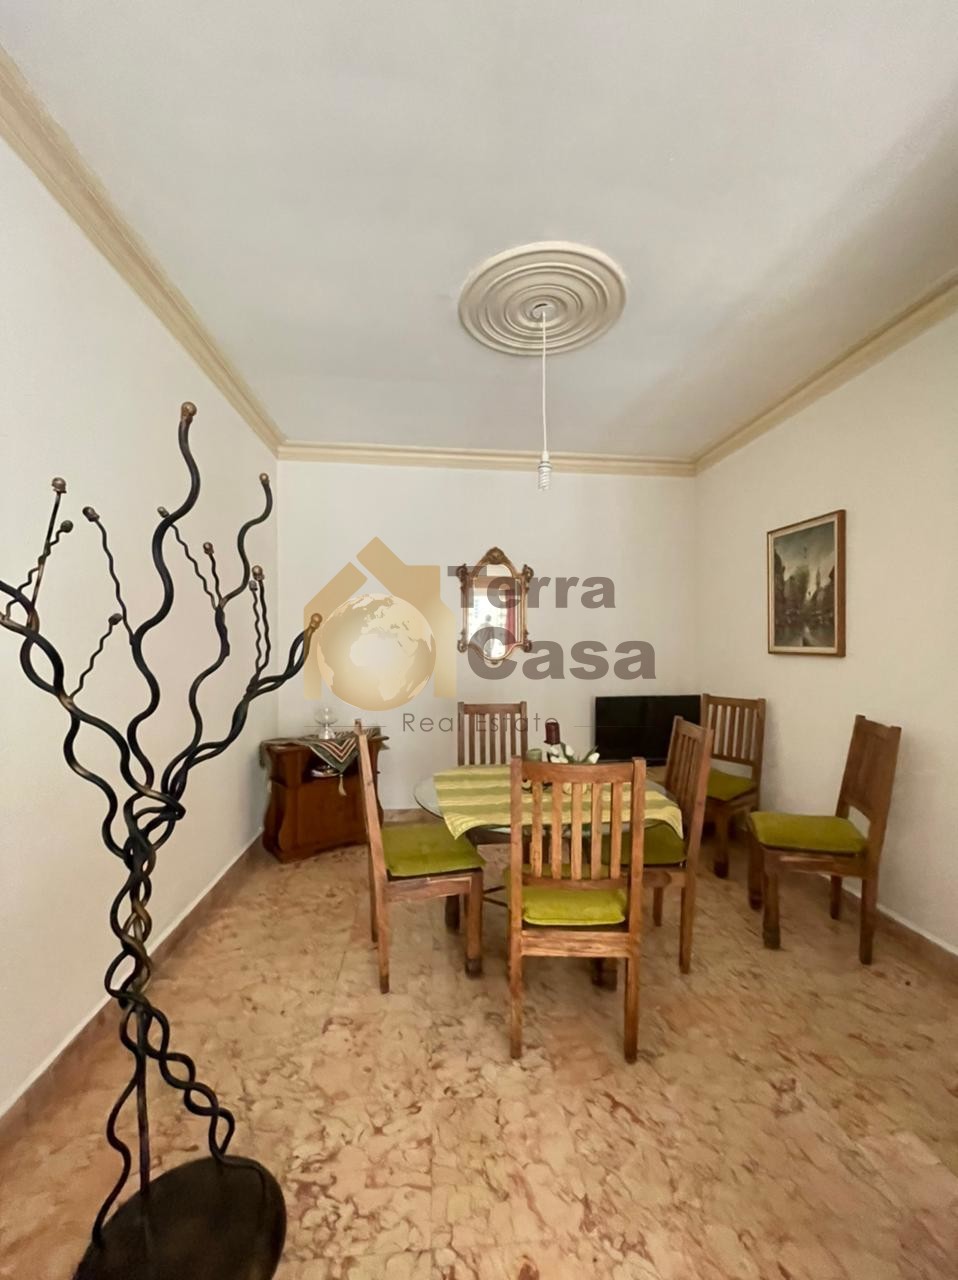 Fassouh fully furnished apartment for rent .